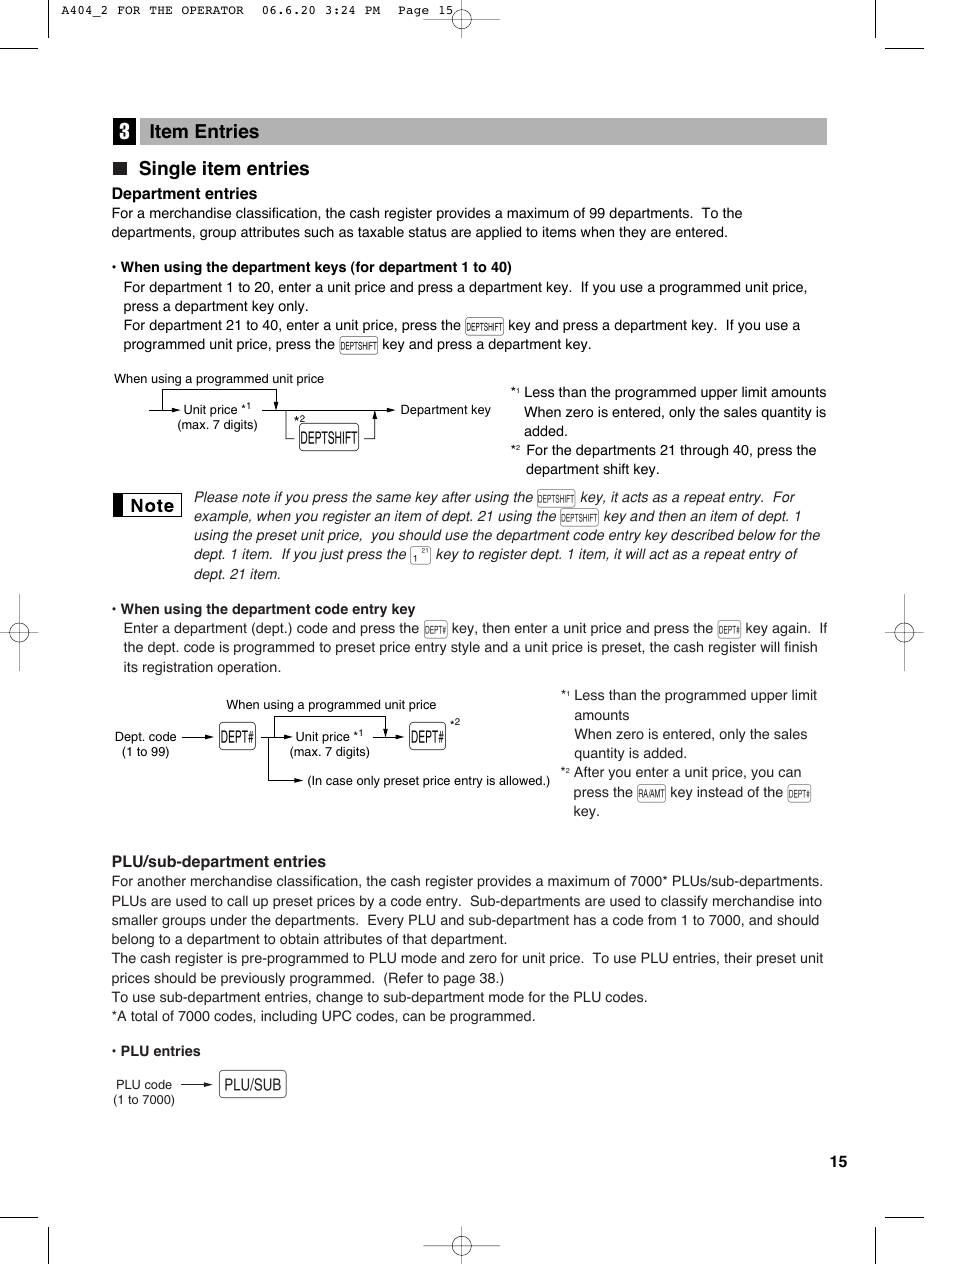 Single item entries, Item entries | Sharp XE-A404 User Manual | Page 17